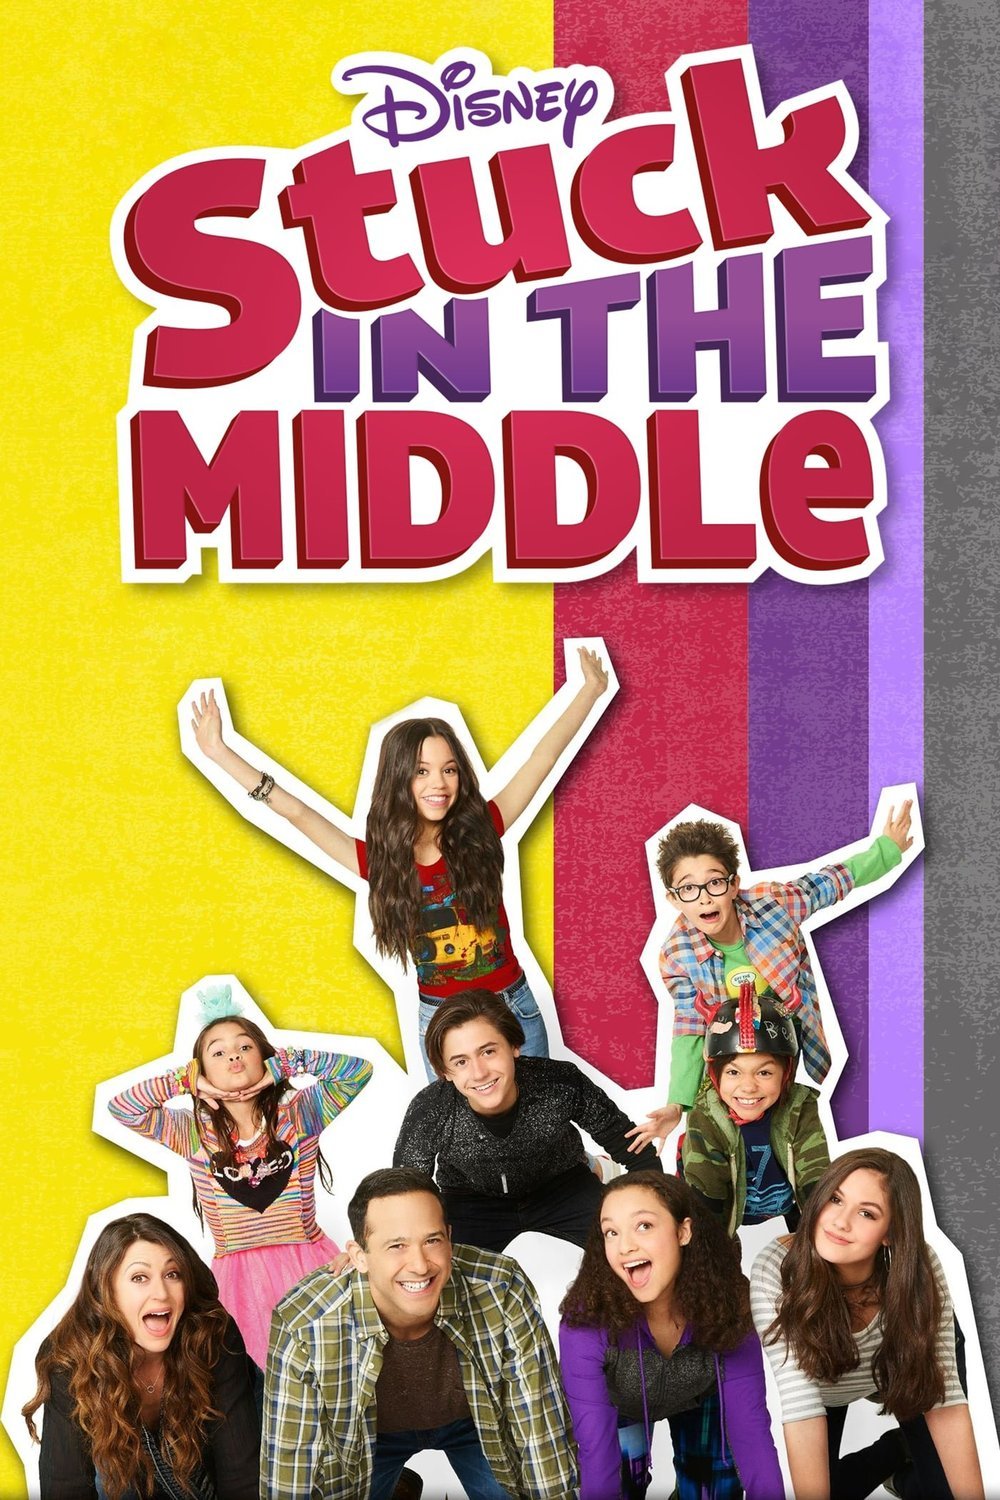 Poster of the movie Stuck in the Middle